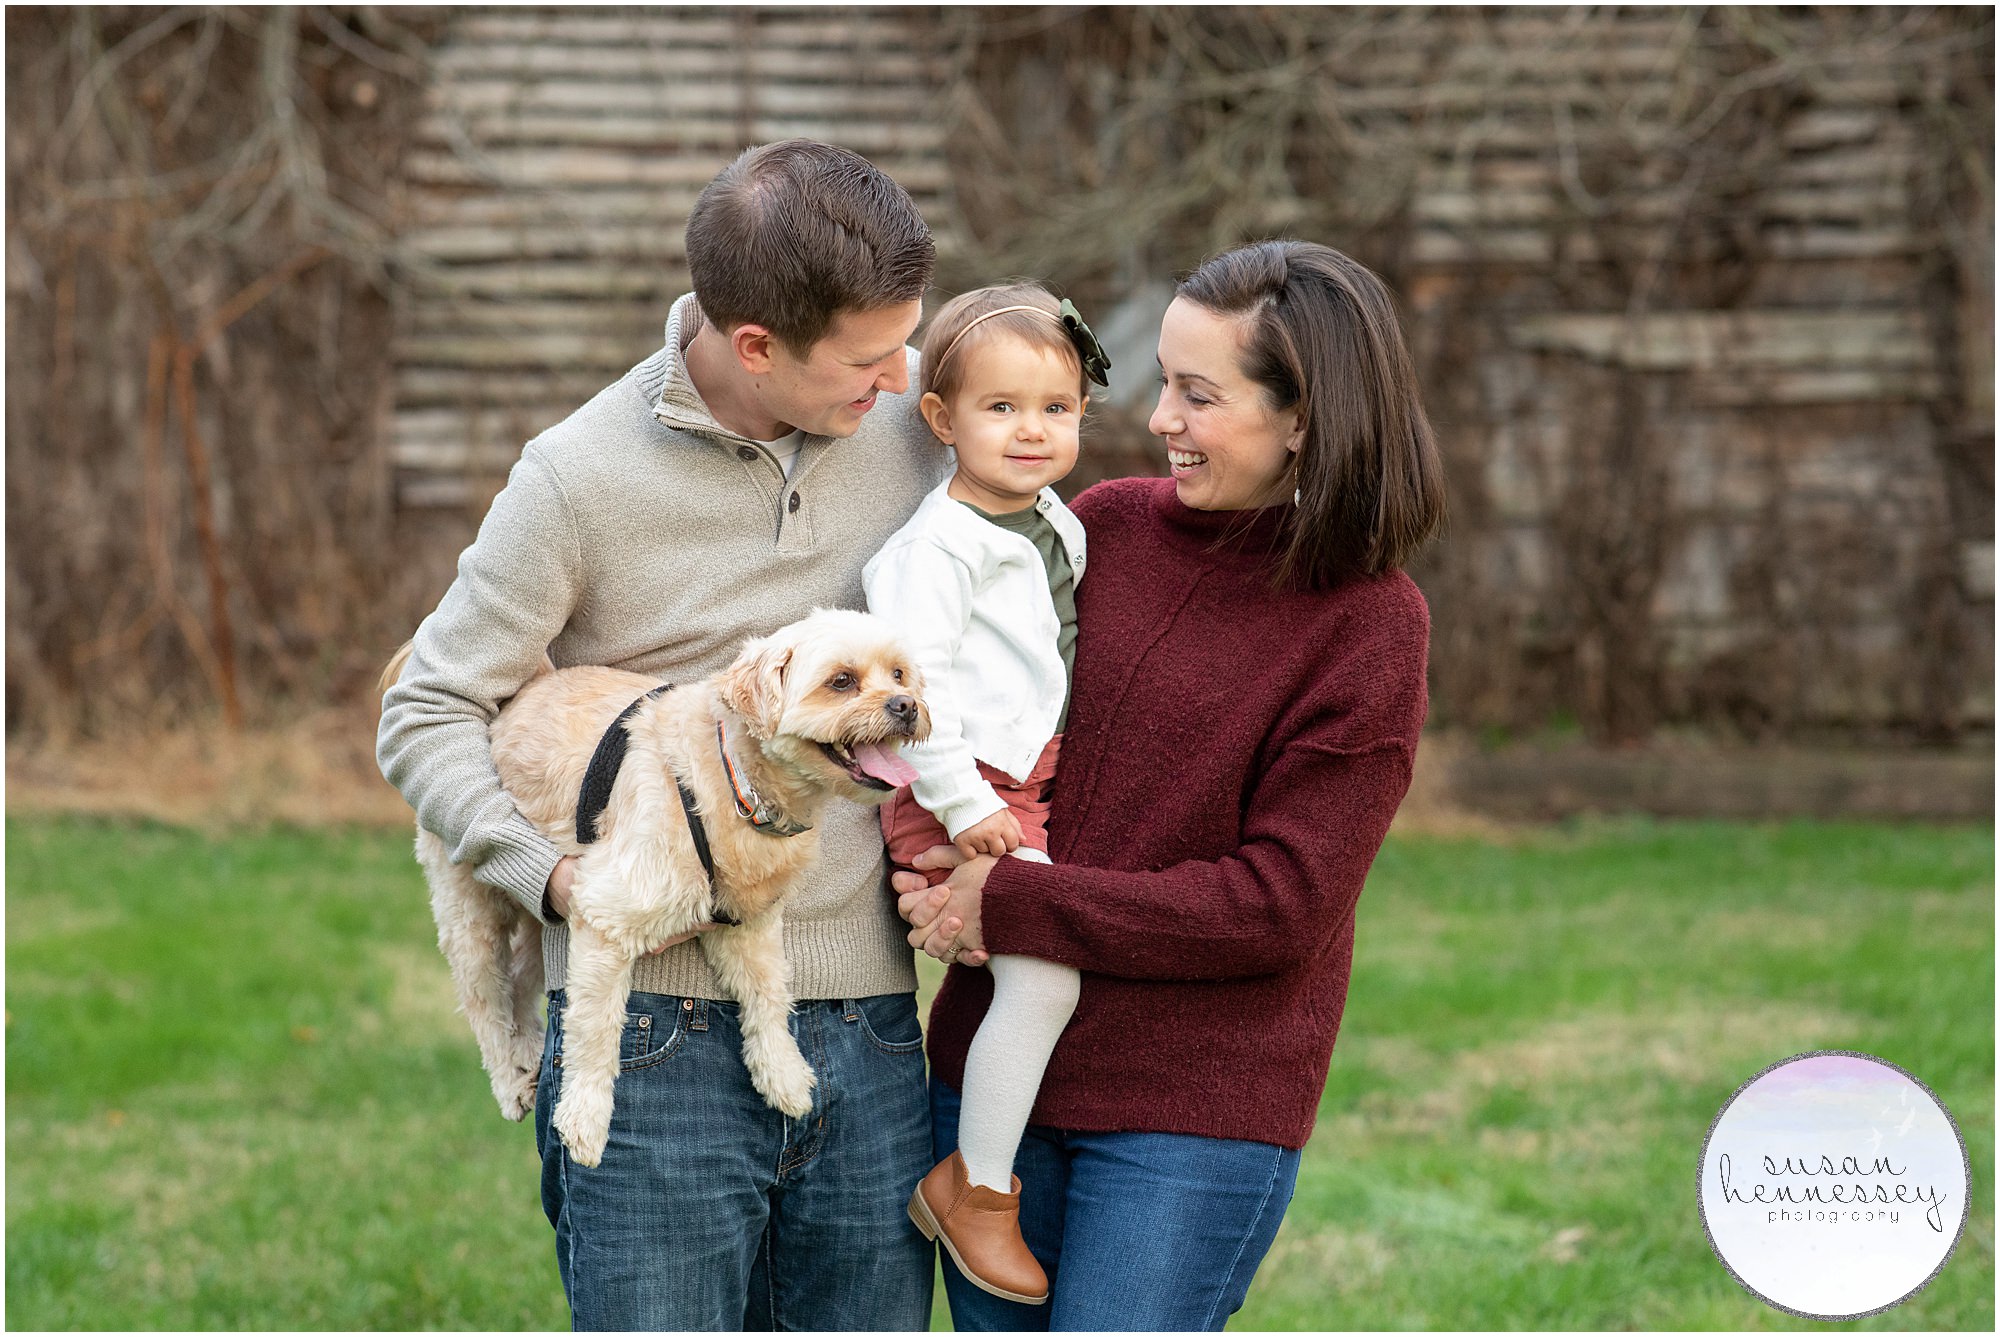 Susan Hennessey Photography, a photographer based in Moorestown, NJ photographs yearly South Jersey holiday family photo sessions in the Fall. 